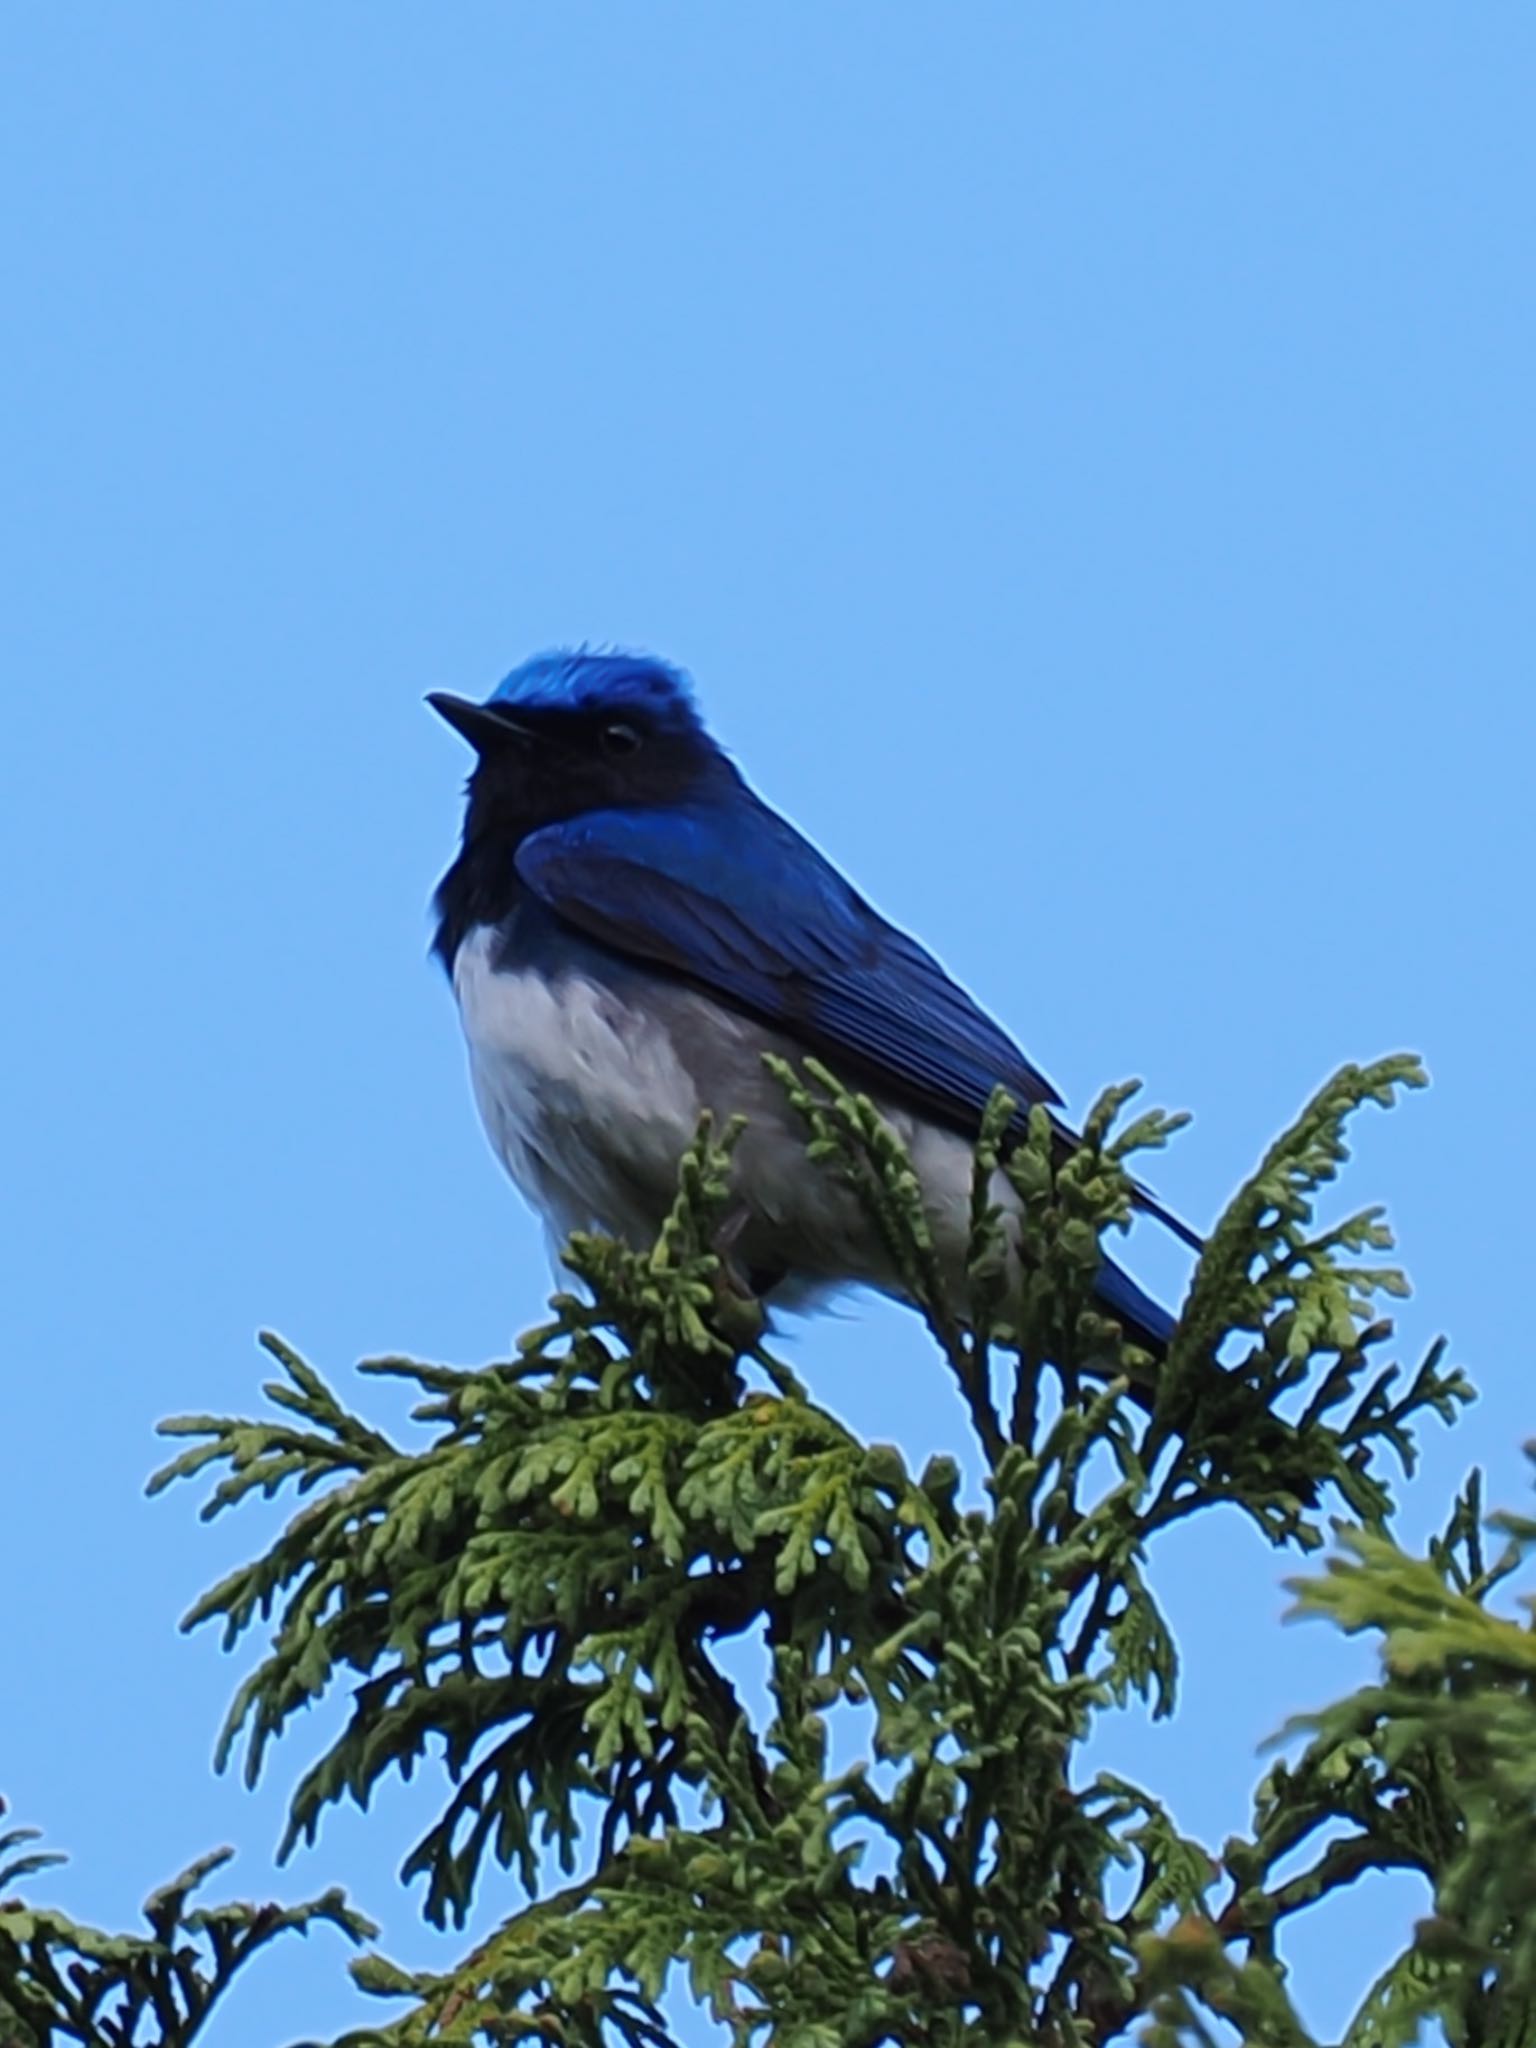 Photo of Blue-and-white Flycatcher at Ozegahara by daffy@お散歩探鳥＆遠征探鳥♪